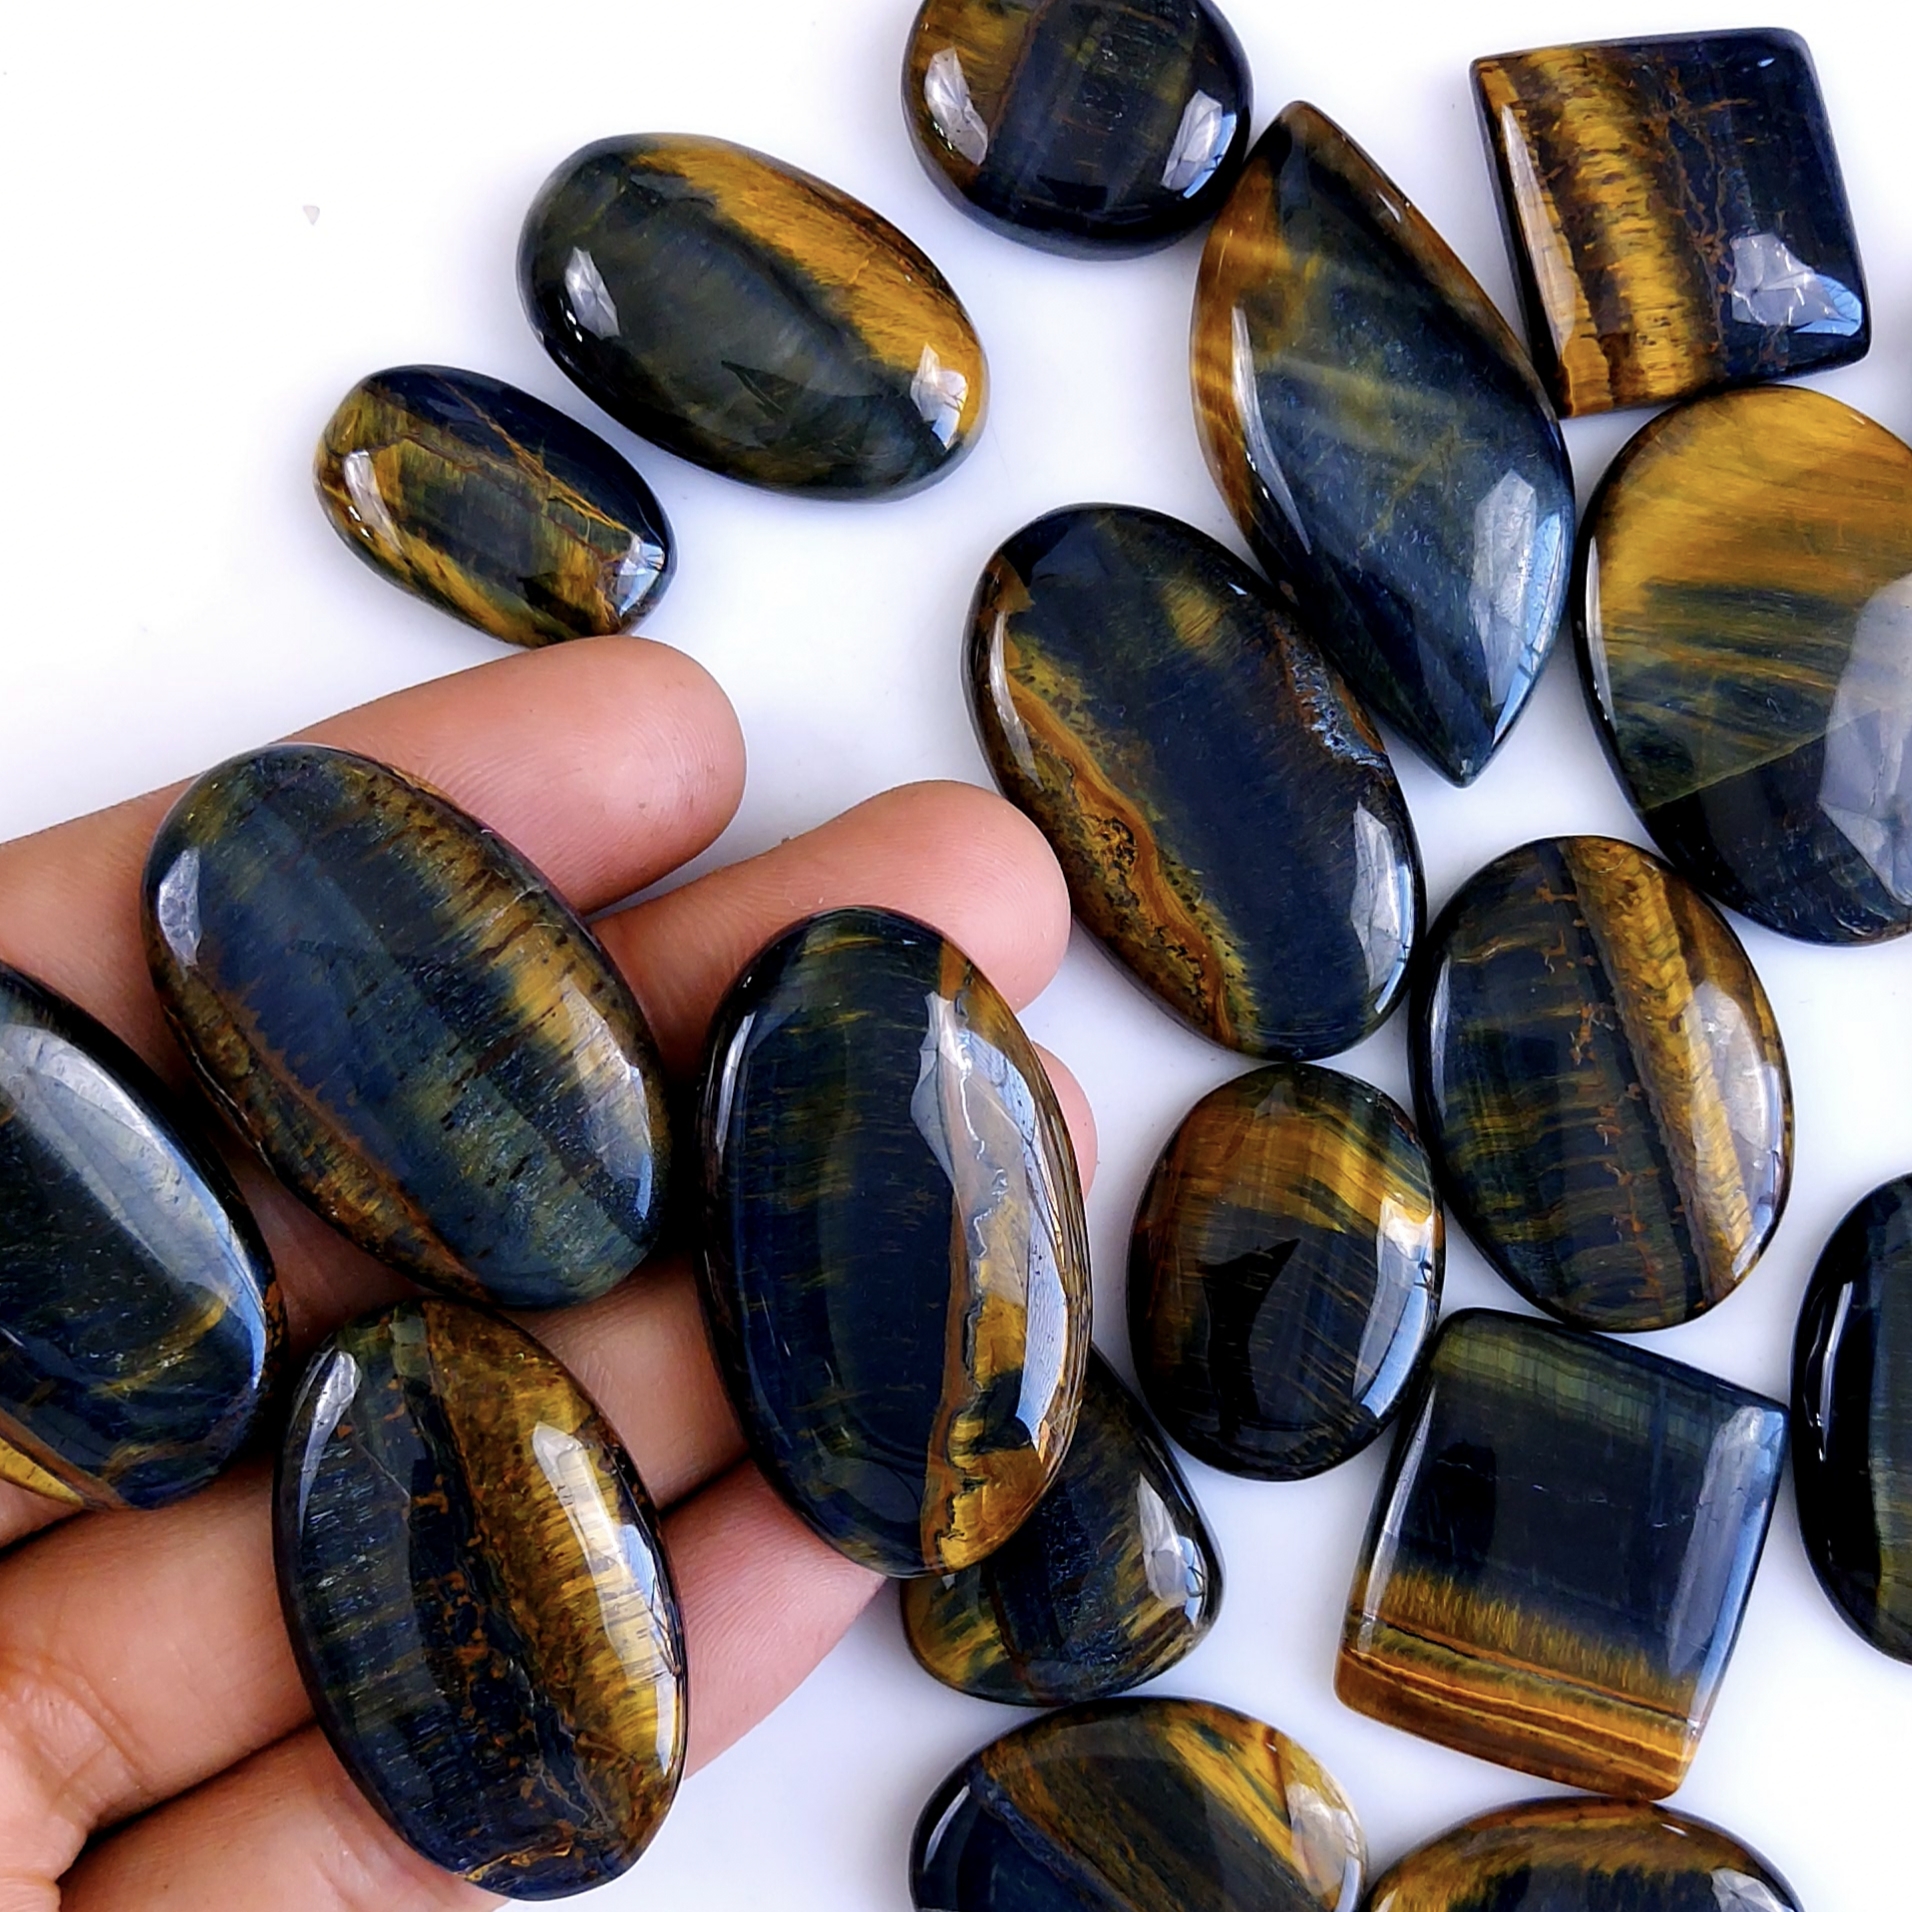 22Pcs 958Cts Natural Tiger Eye Loose Cabochon Gemstone Lot Mix Shape and and Size for Jewelry Making 40x24 24x20mm#1304